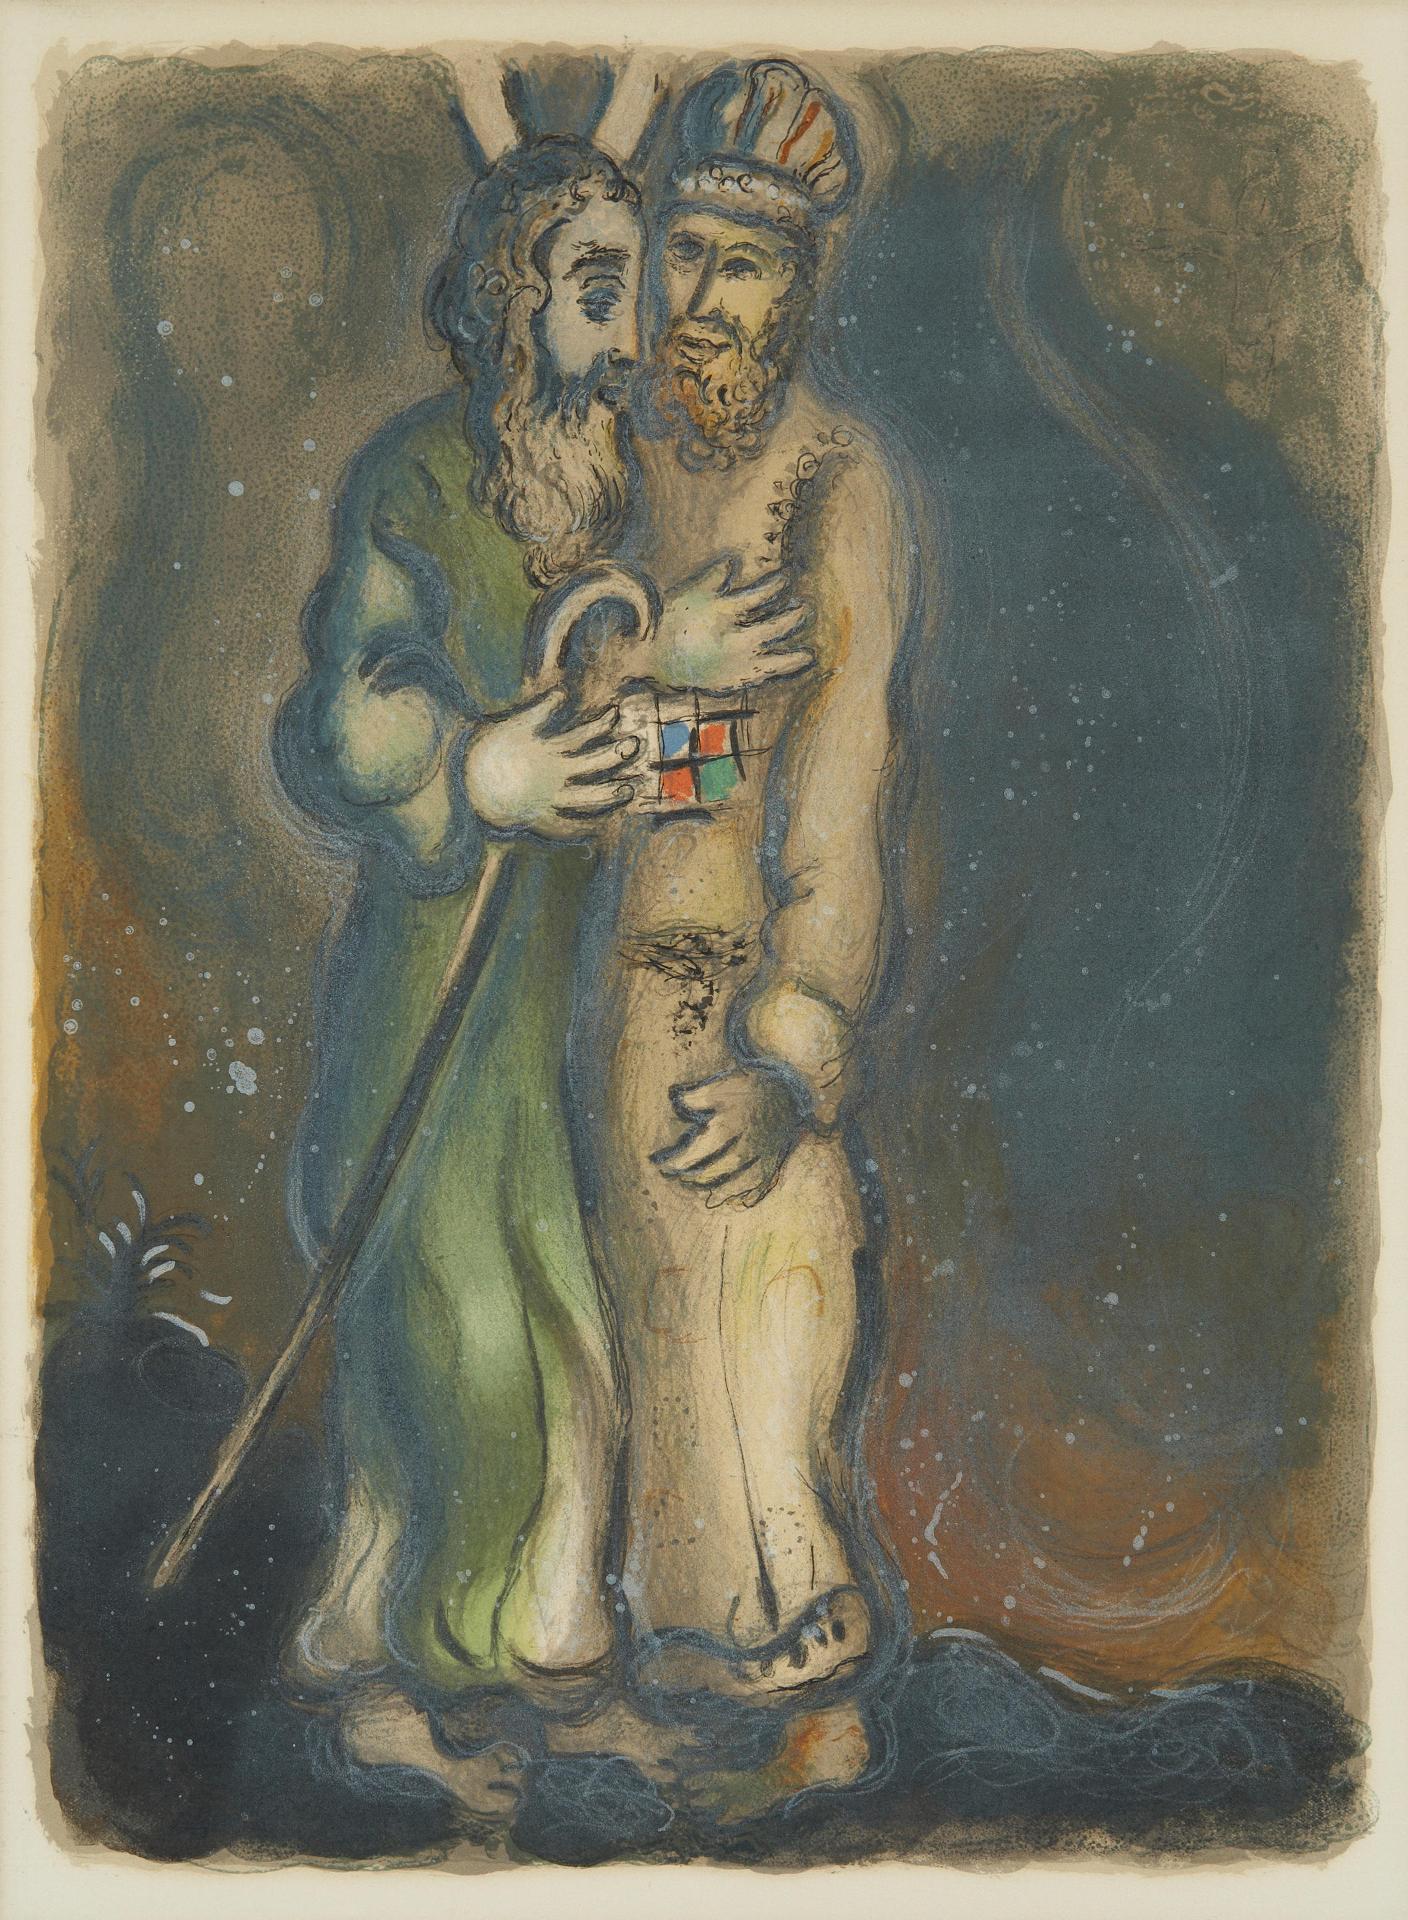 Marc Chagall (1887-1985) - God sends Aaron to meet Moses in the desert (from The Story of Exodus)